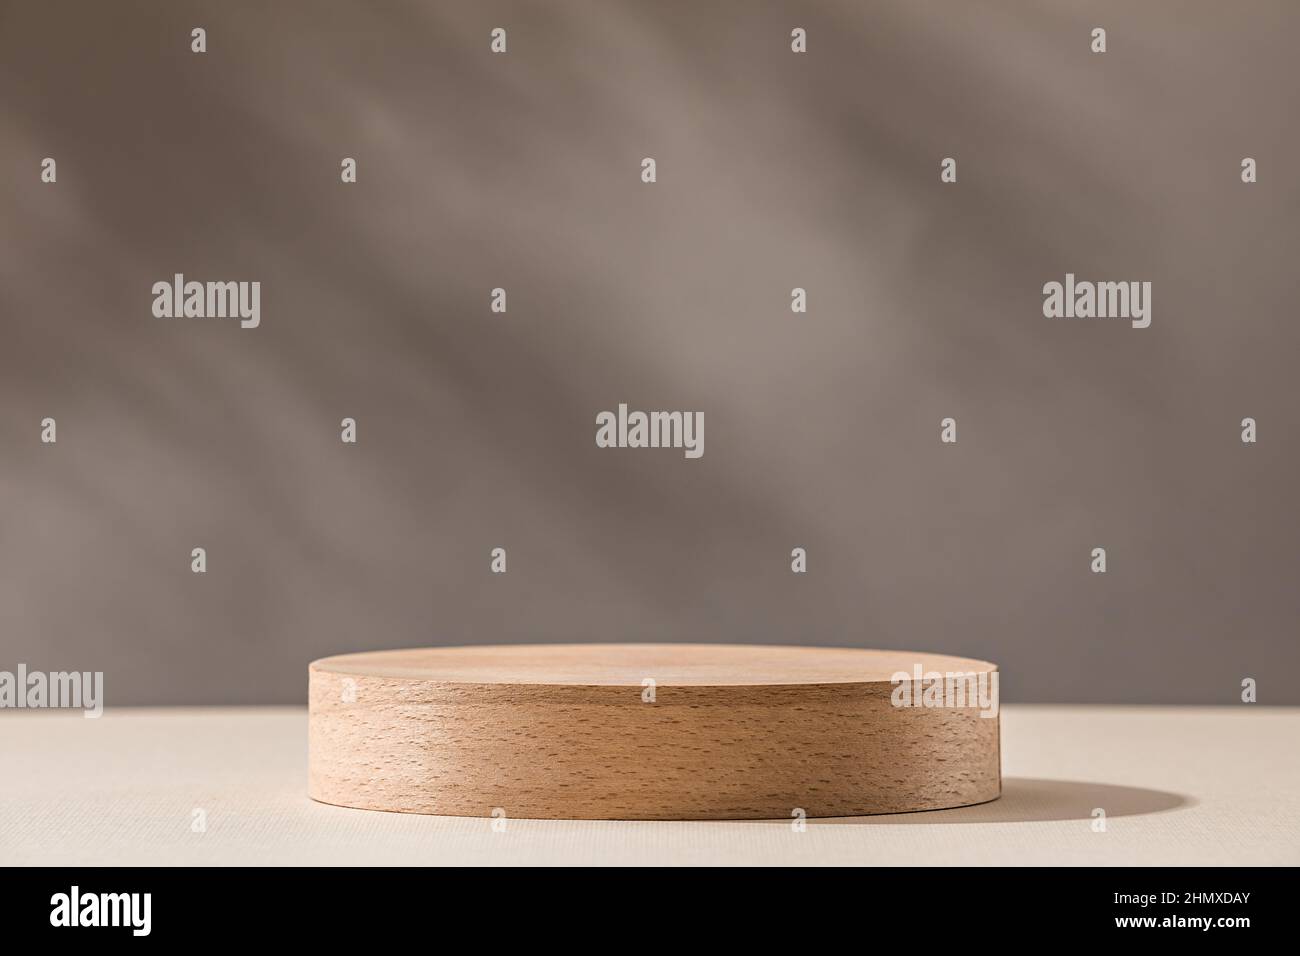 Wooden cylinder podium on a background in warm colors Stock Photo